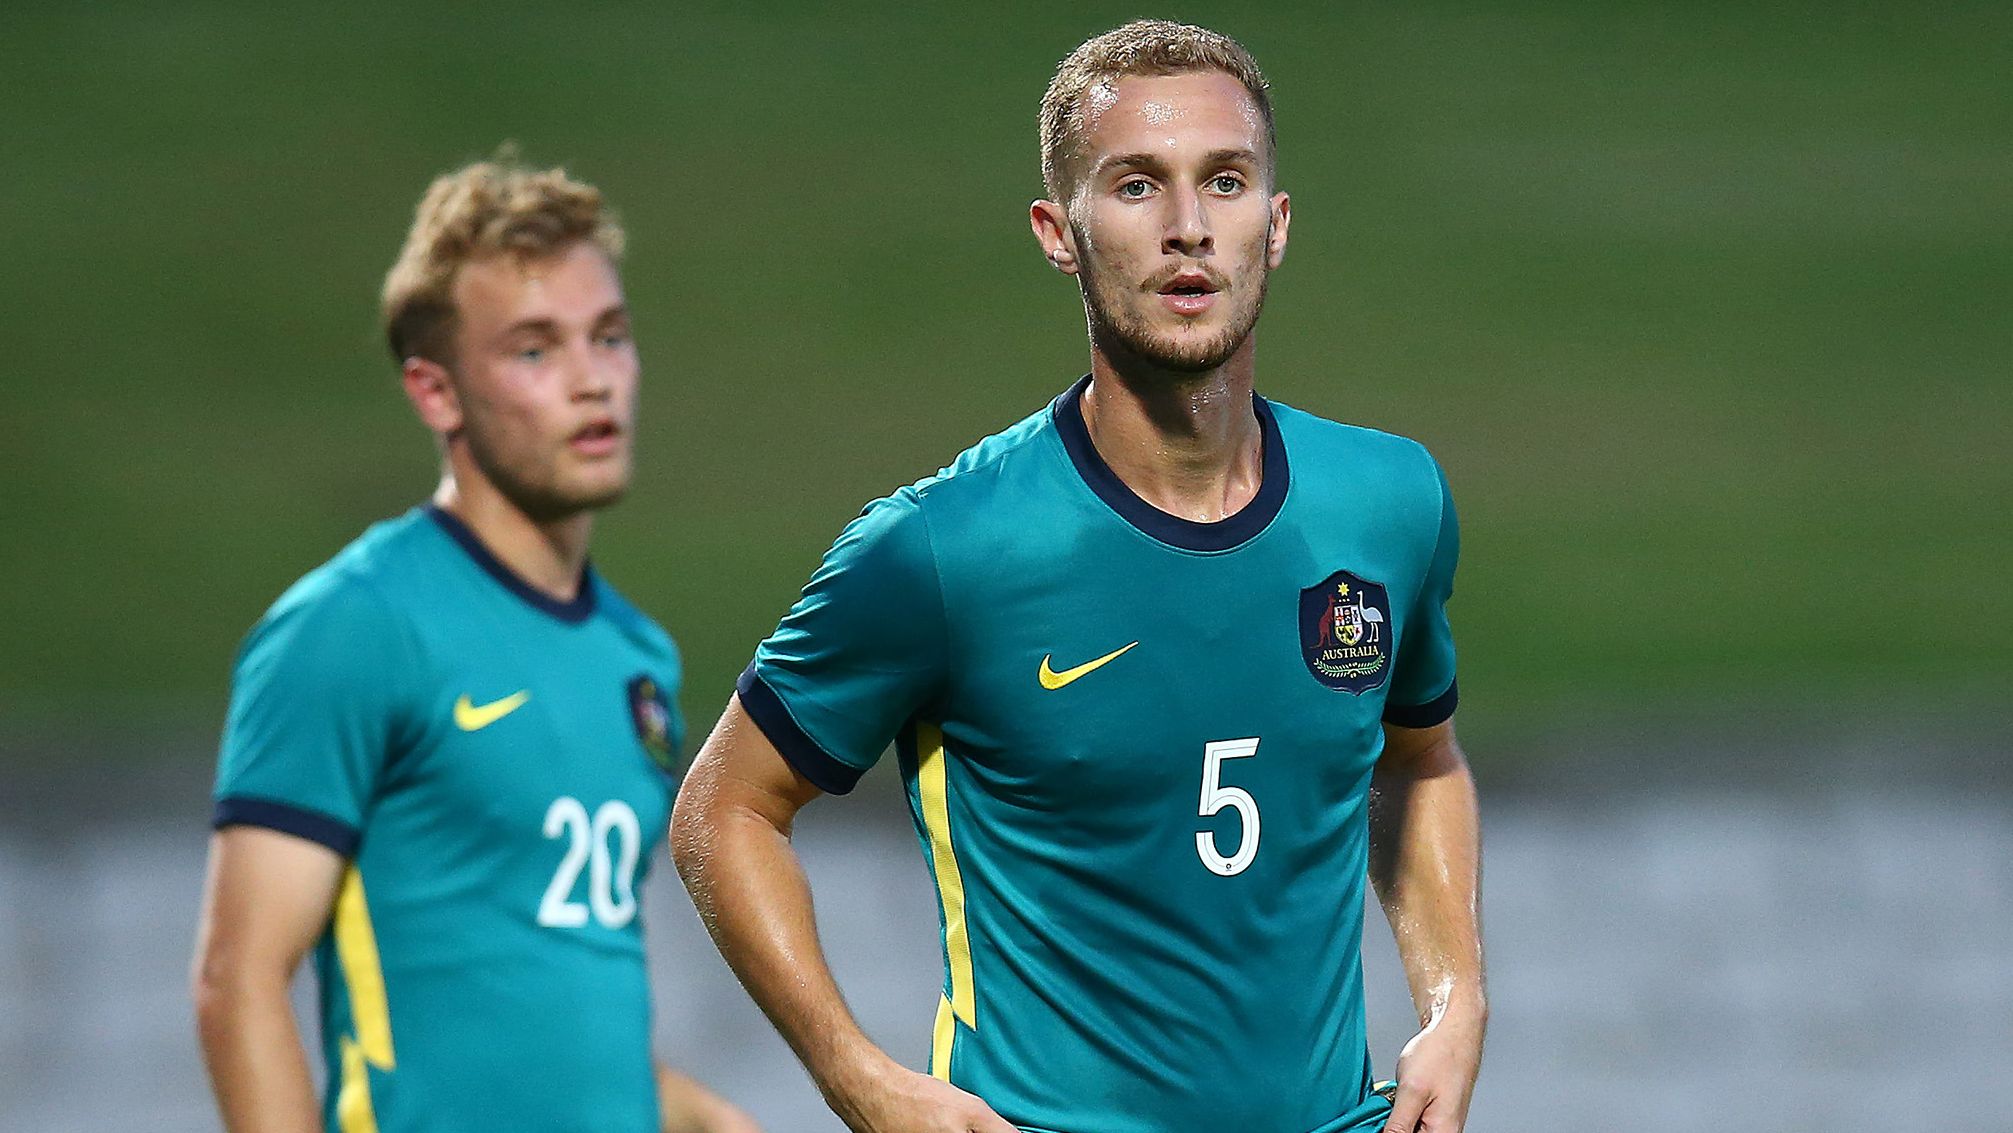 'Such a disappointing campaign': Olyroos fail to qualify for Olympic Games